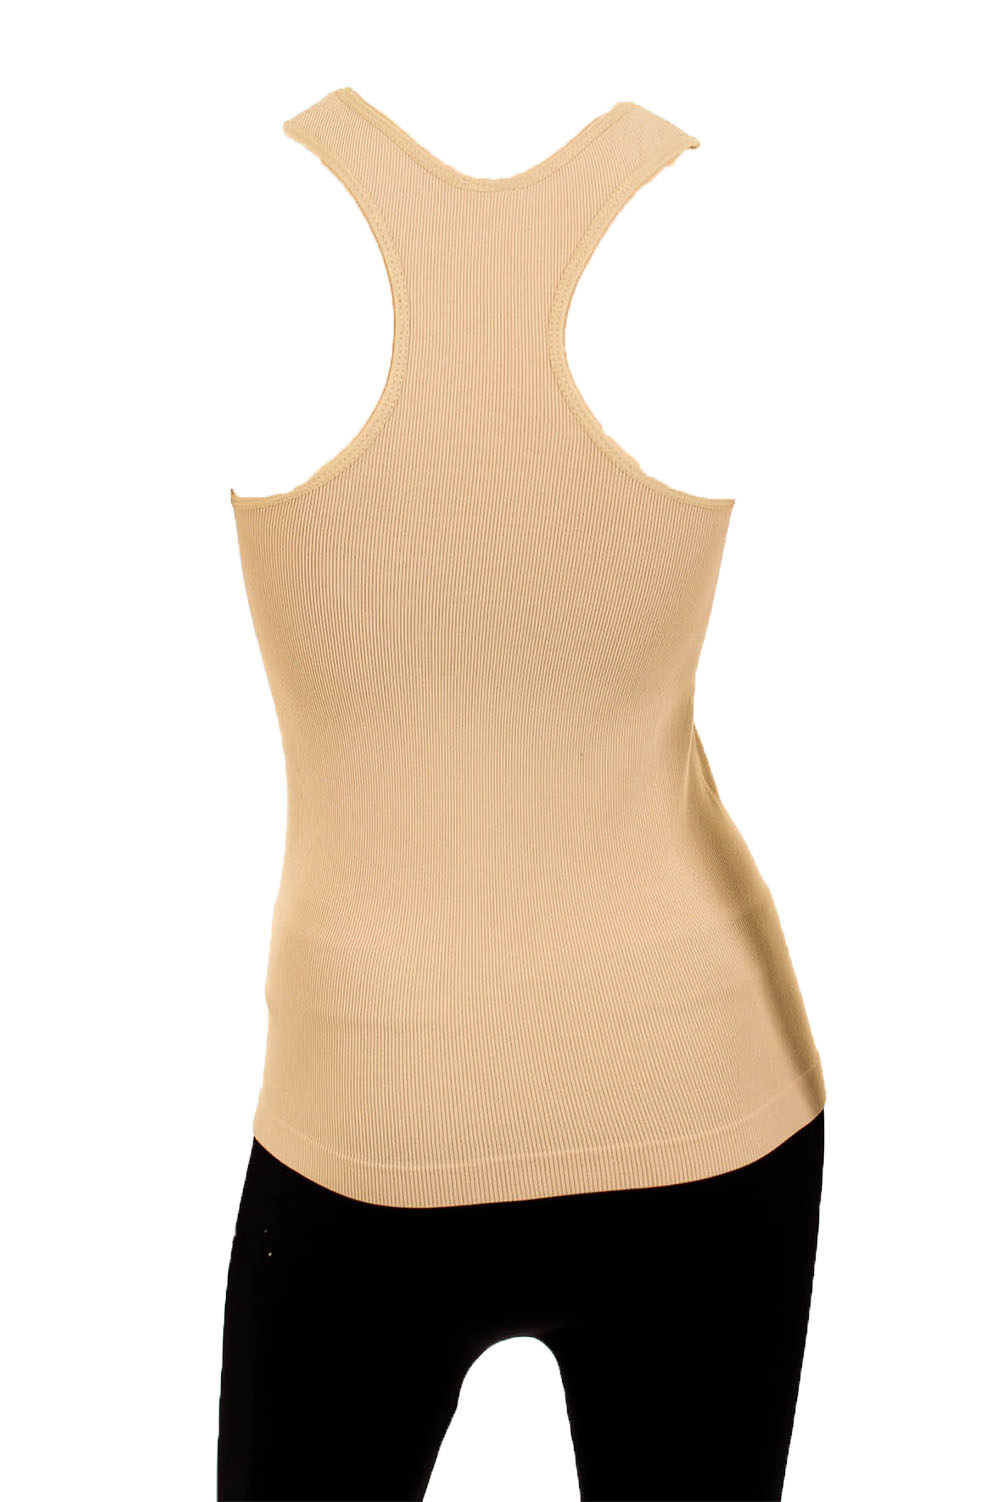 LAVRA Women's Ribbed Knit Racerback Tank Top - image 2 of 2